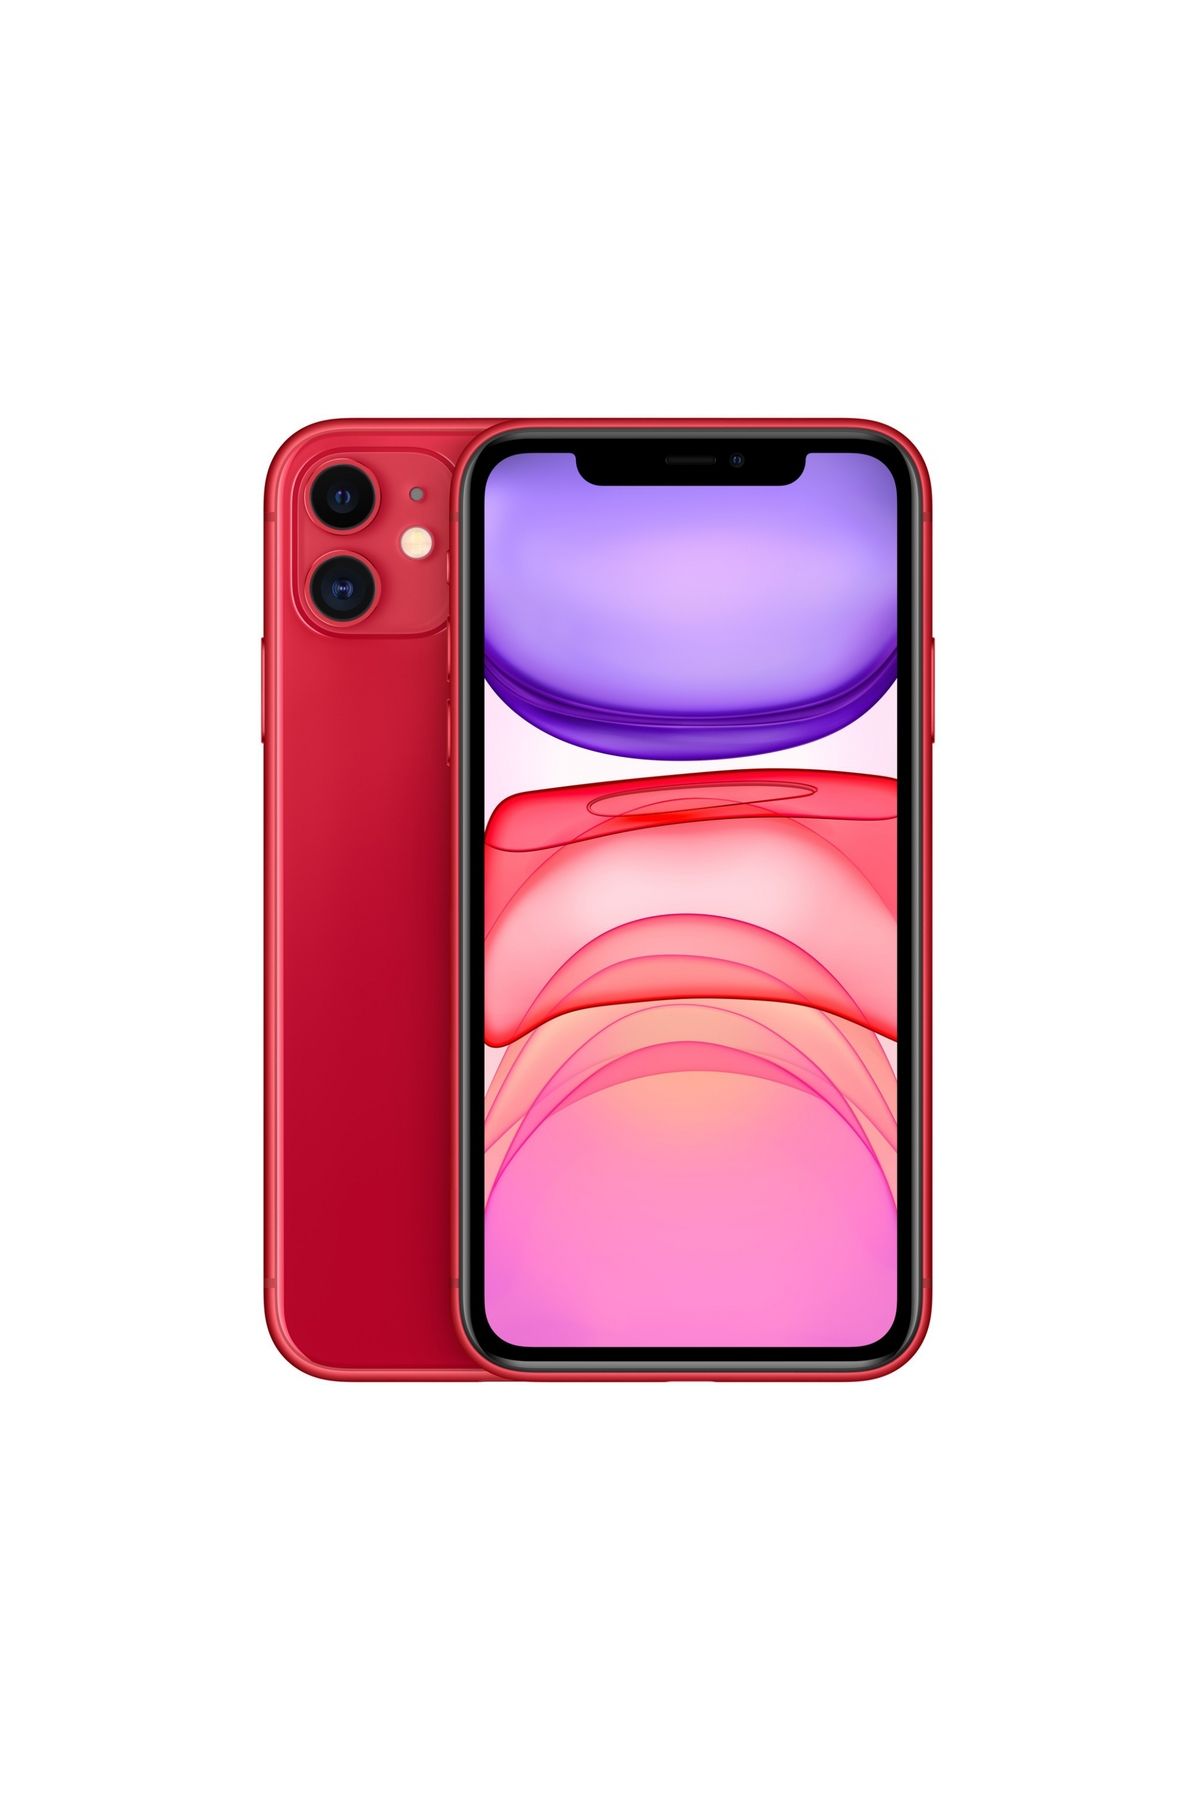 Apple Iphone 11 64gb (PRODUCT)red - Yenilenmis - A Kalite